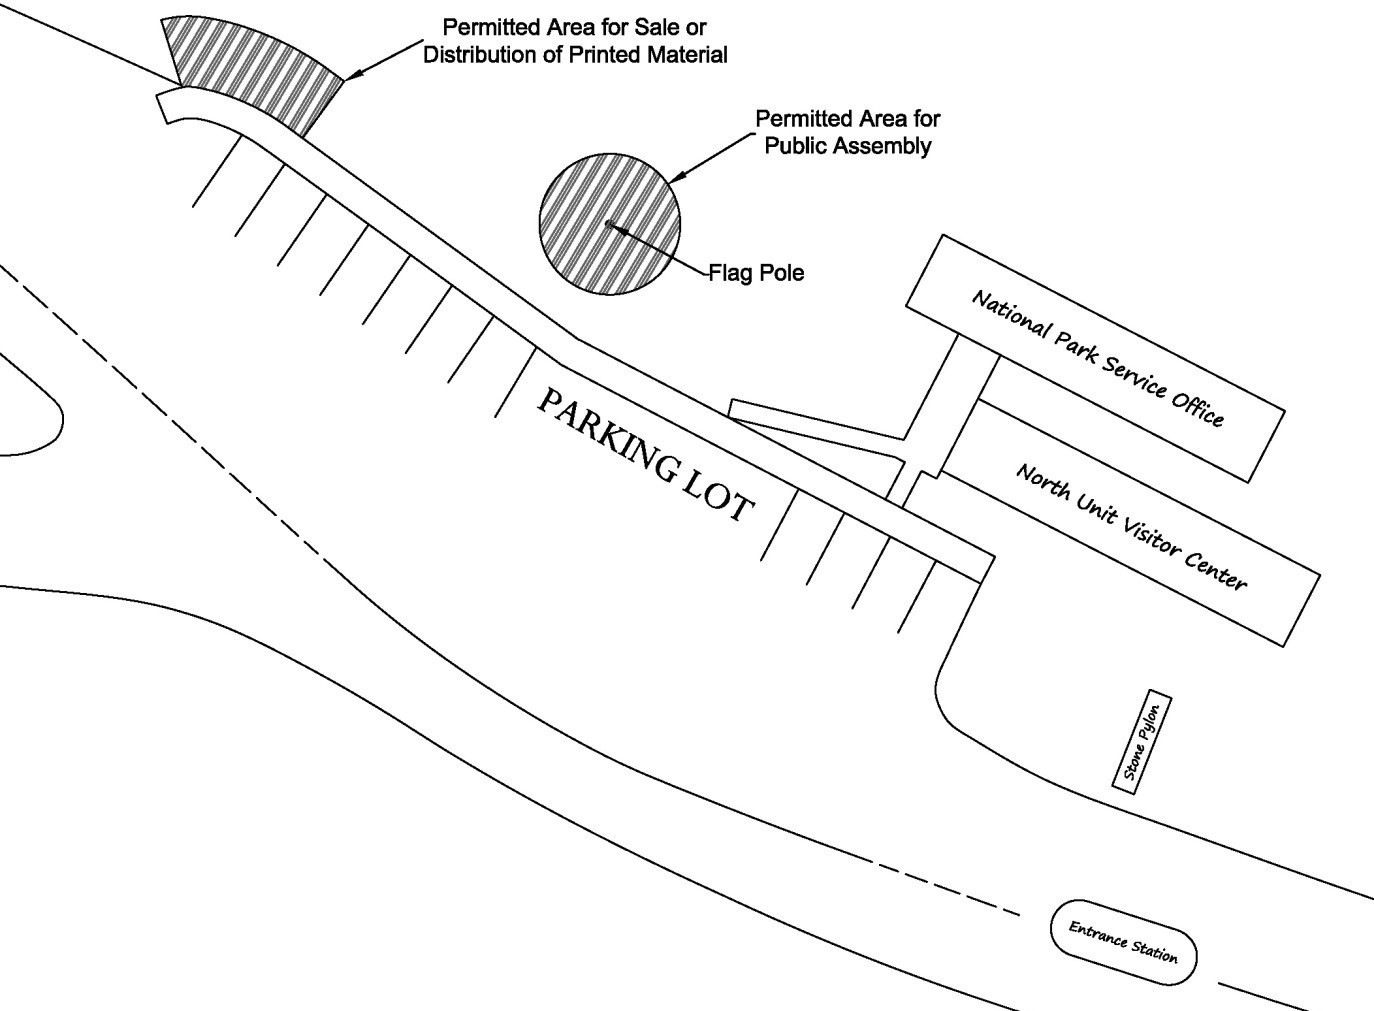 A map showing the North Unit Visitor Center area and designated location for printed materials and permitted area for public assembly. Both areas are to the top left of the visitor center on the right side of the parking lot.